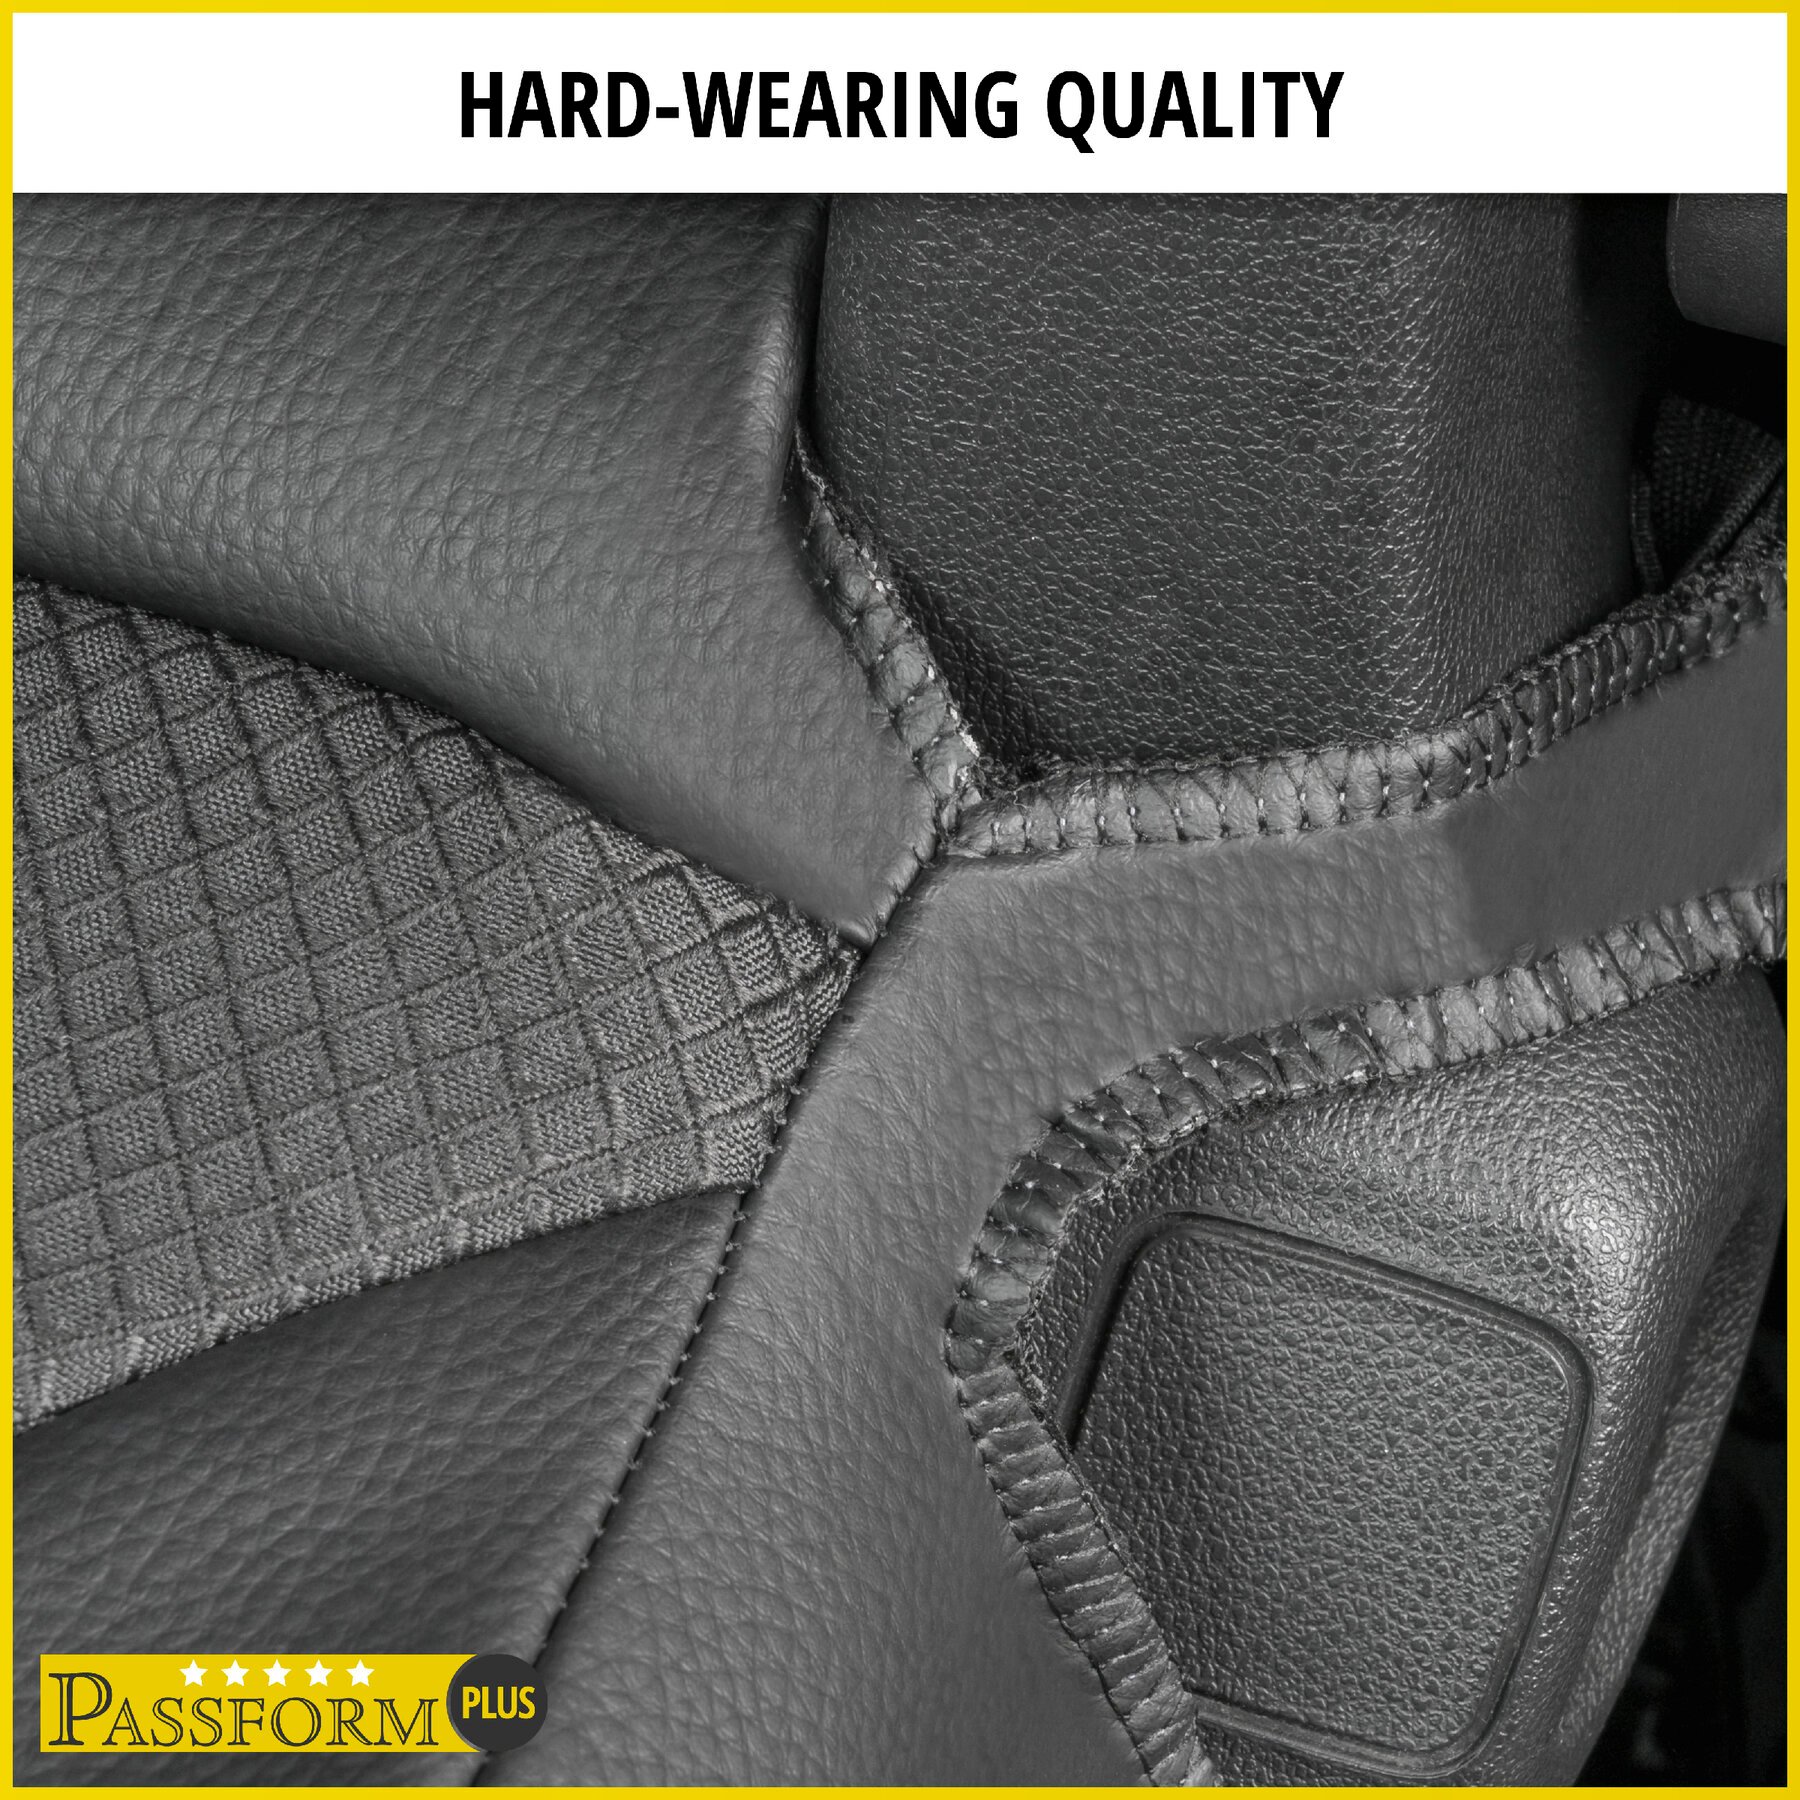 Premium Seat Cover for Ford Transit 2006-12/2014, 2 single seat covers front